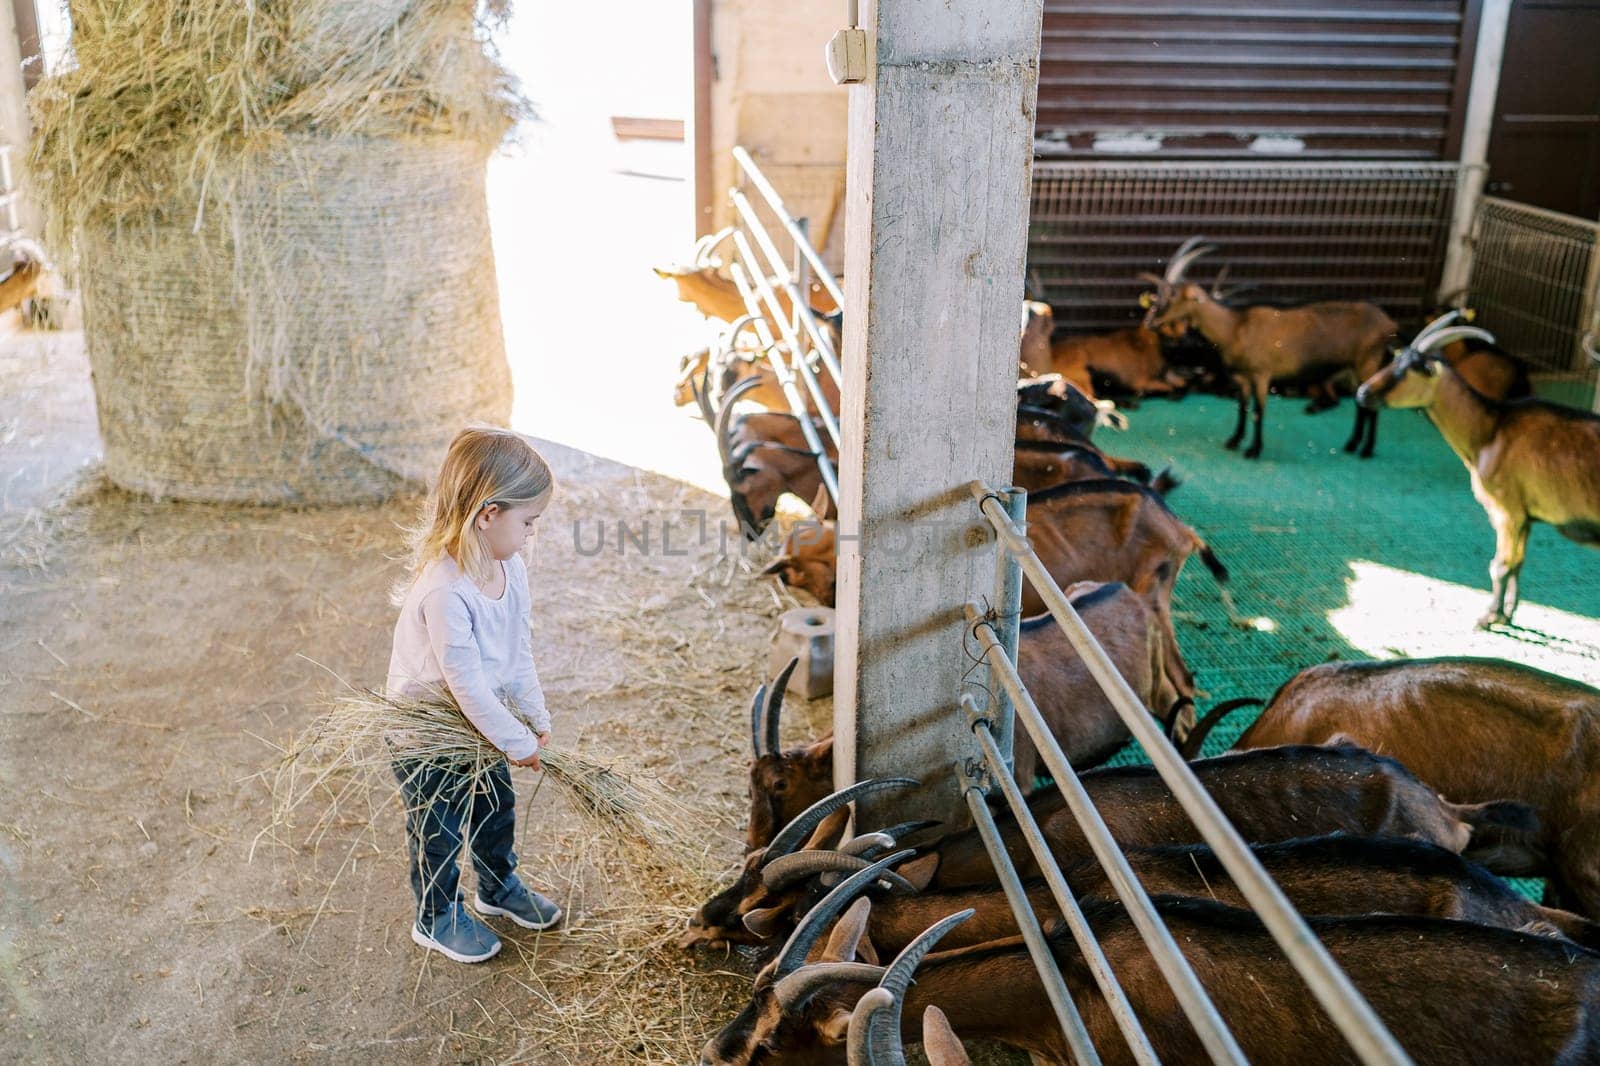 Little girl walks with a bundle of hay near goats peeking out from behind a fence in a pen. High quality photo